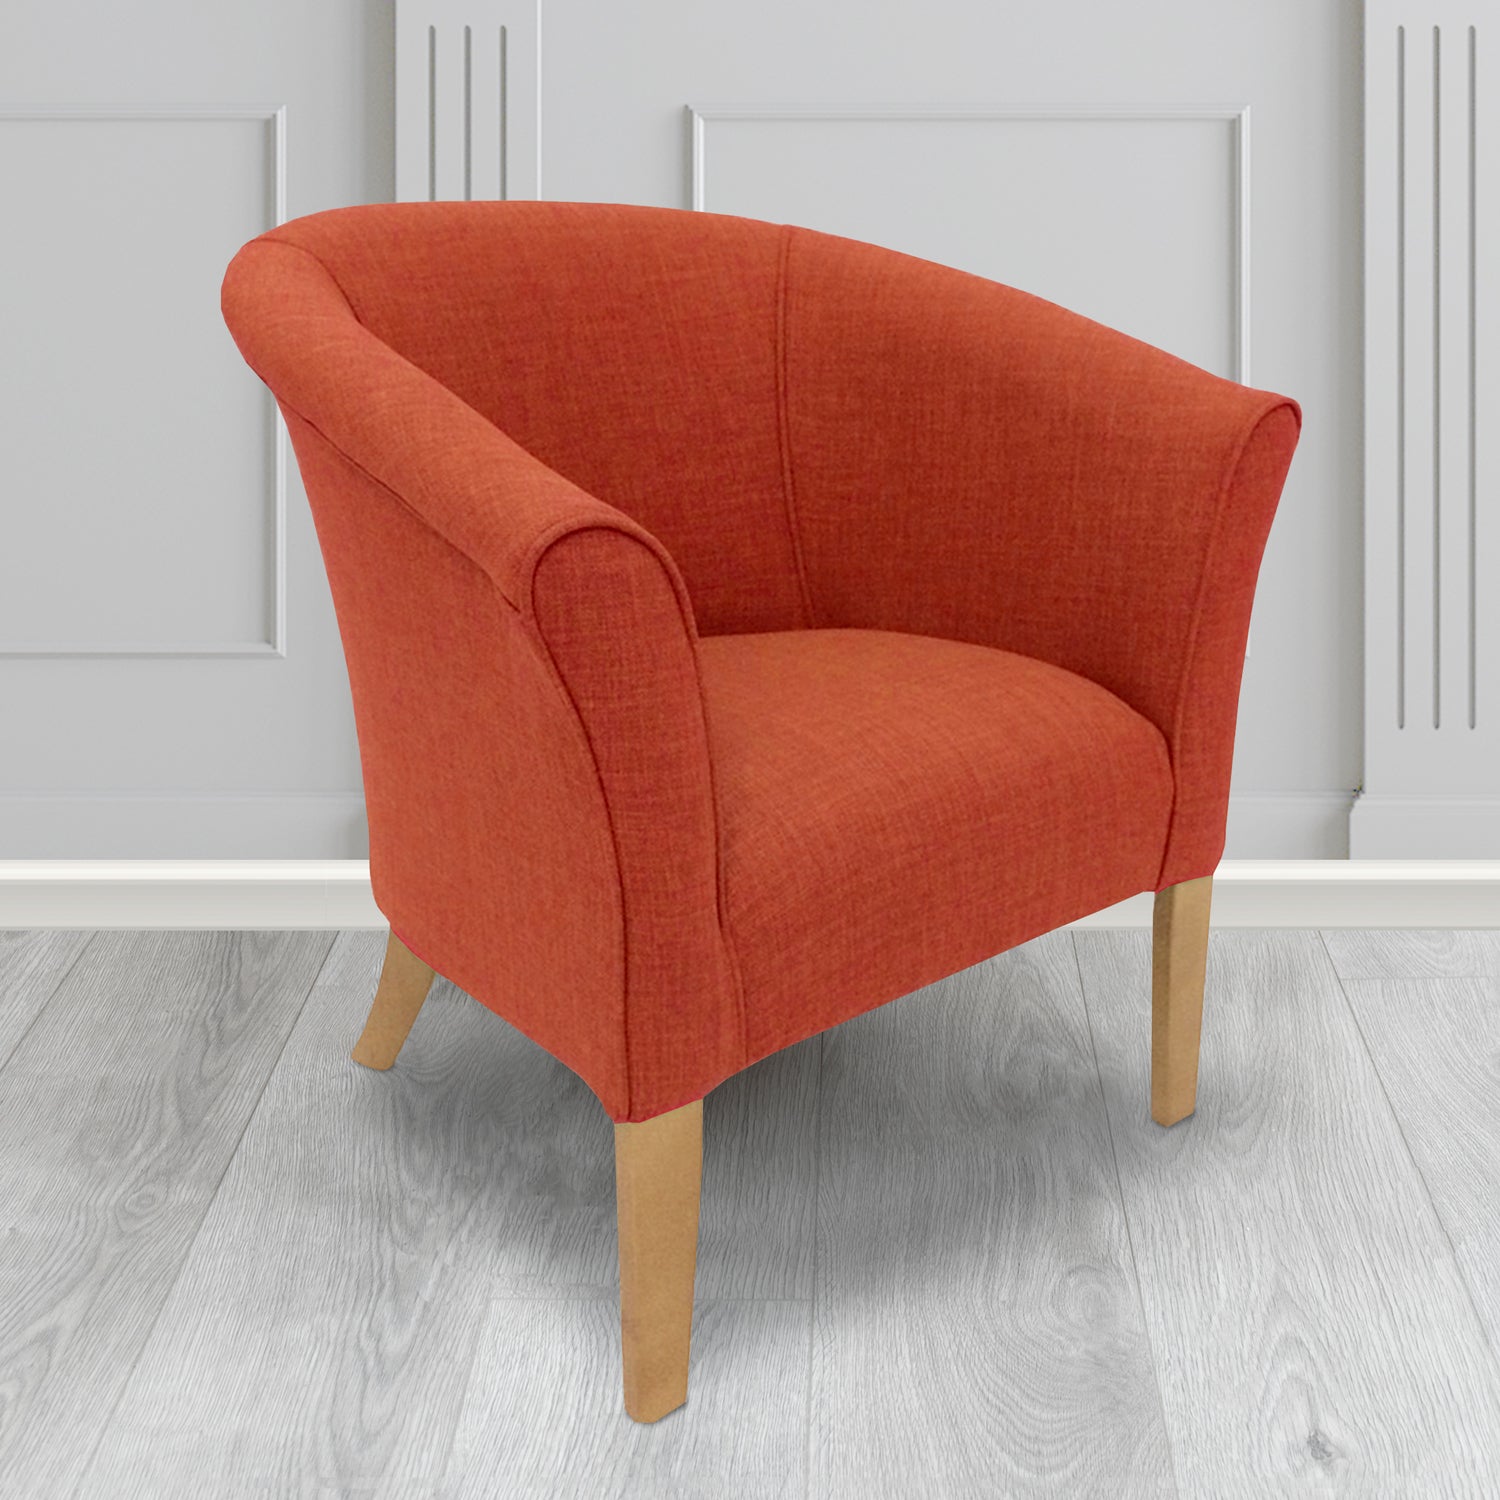 Quill Tub Chair in Linetta Burnt Orange Crib 5 Plain Fabric - Antimicrobial, Stain Resistant & Waterproof - The Tub Chair Shop